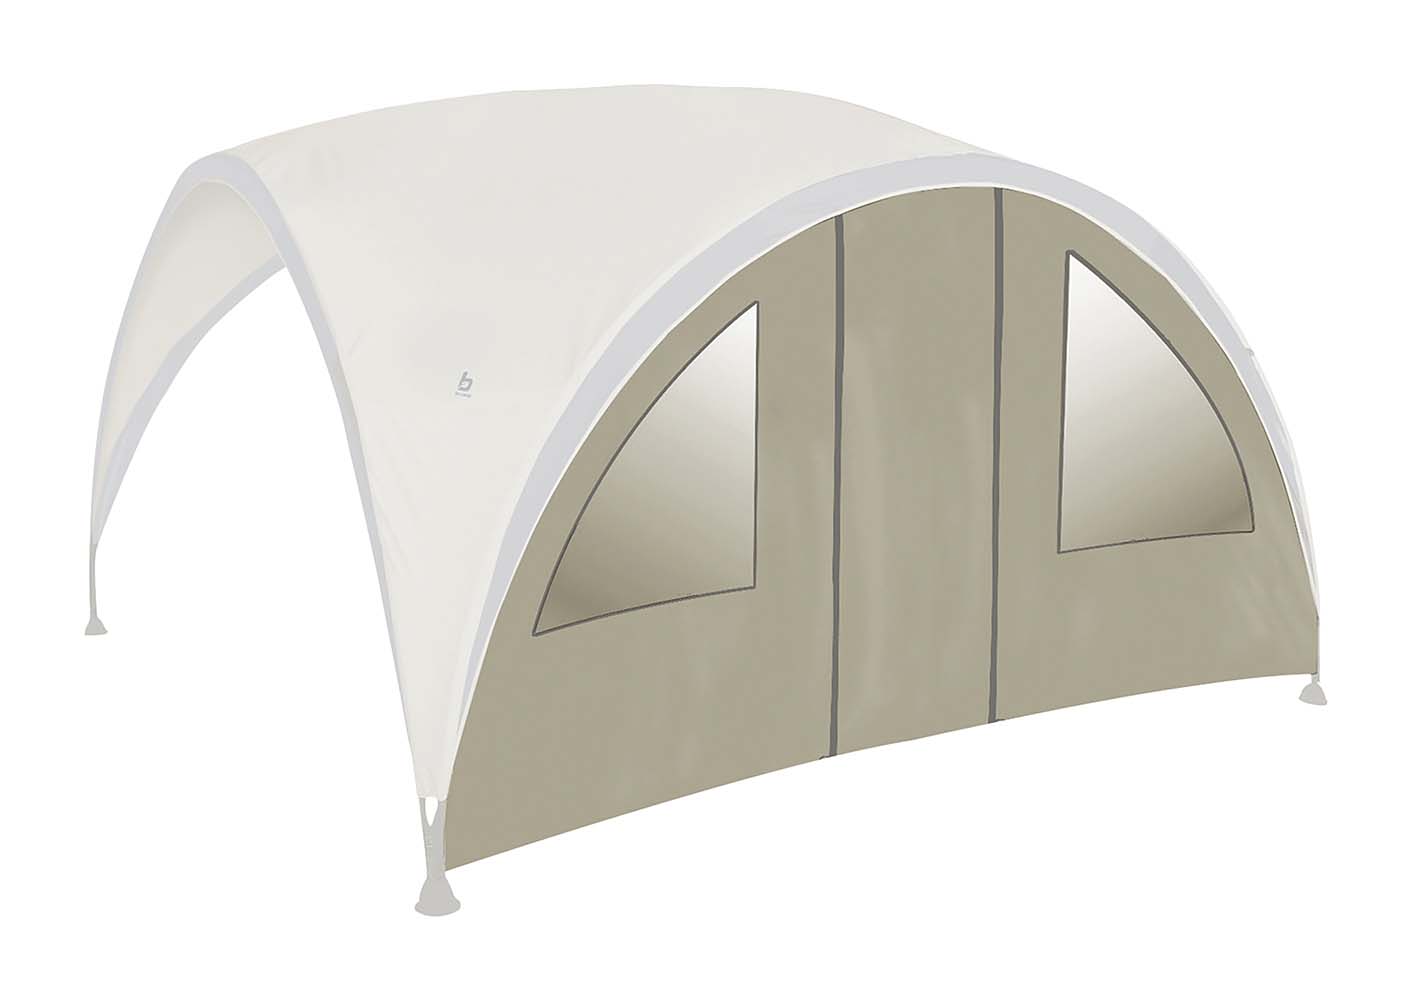 4472222 Bo-Camp - Sidewall - Party Shelter - Polyester - Small - With door and window